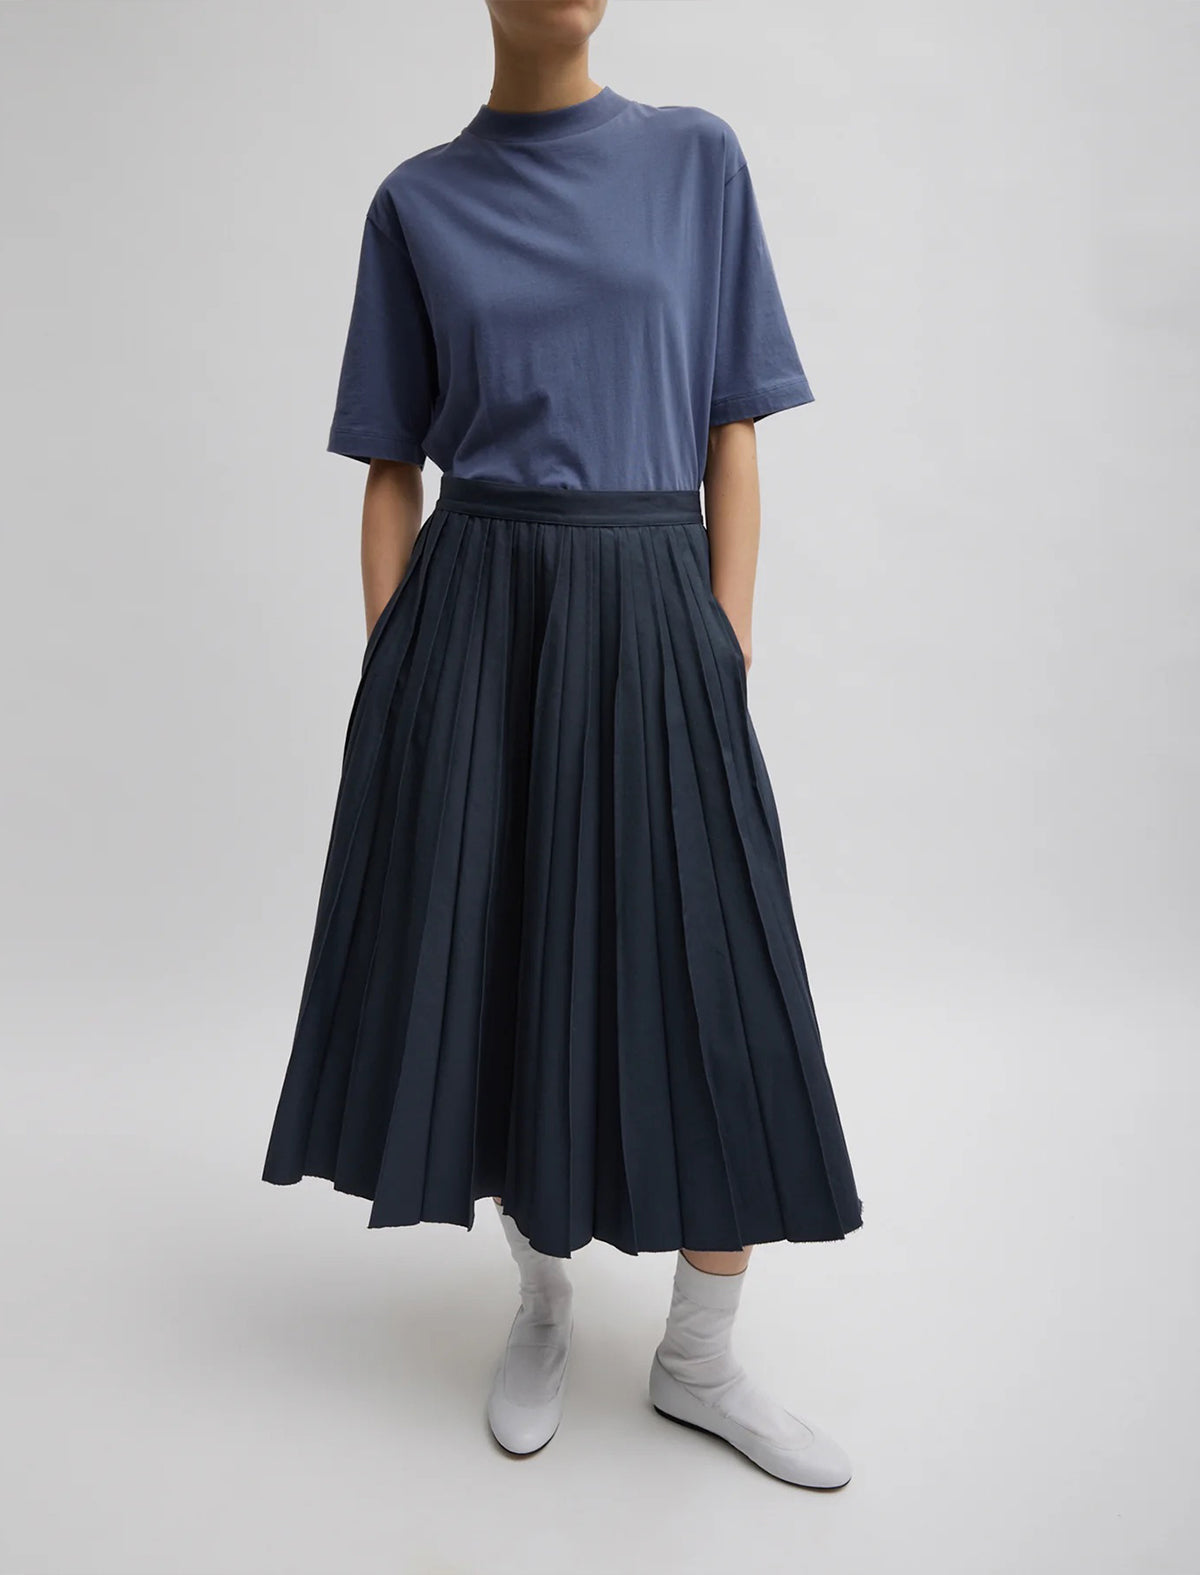 TIBI Oliver Cotton Stretch Tricotine Pintucked Skirt In Slate Blue